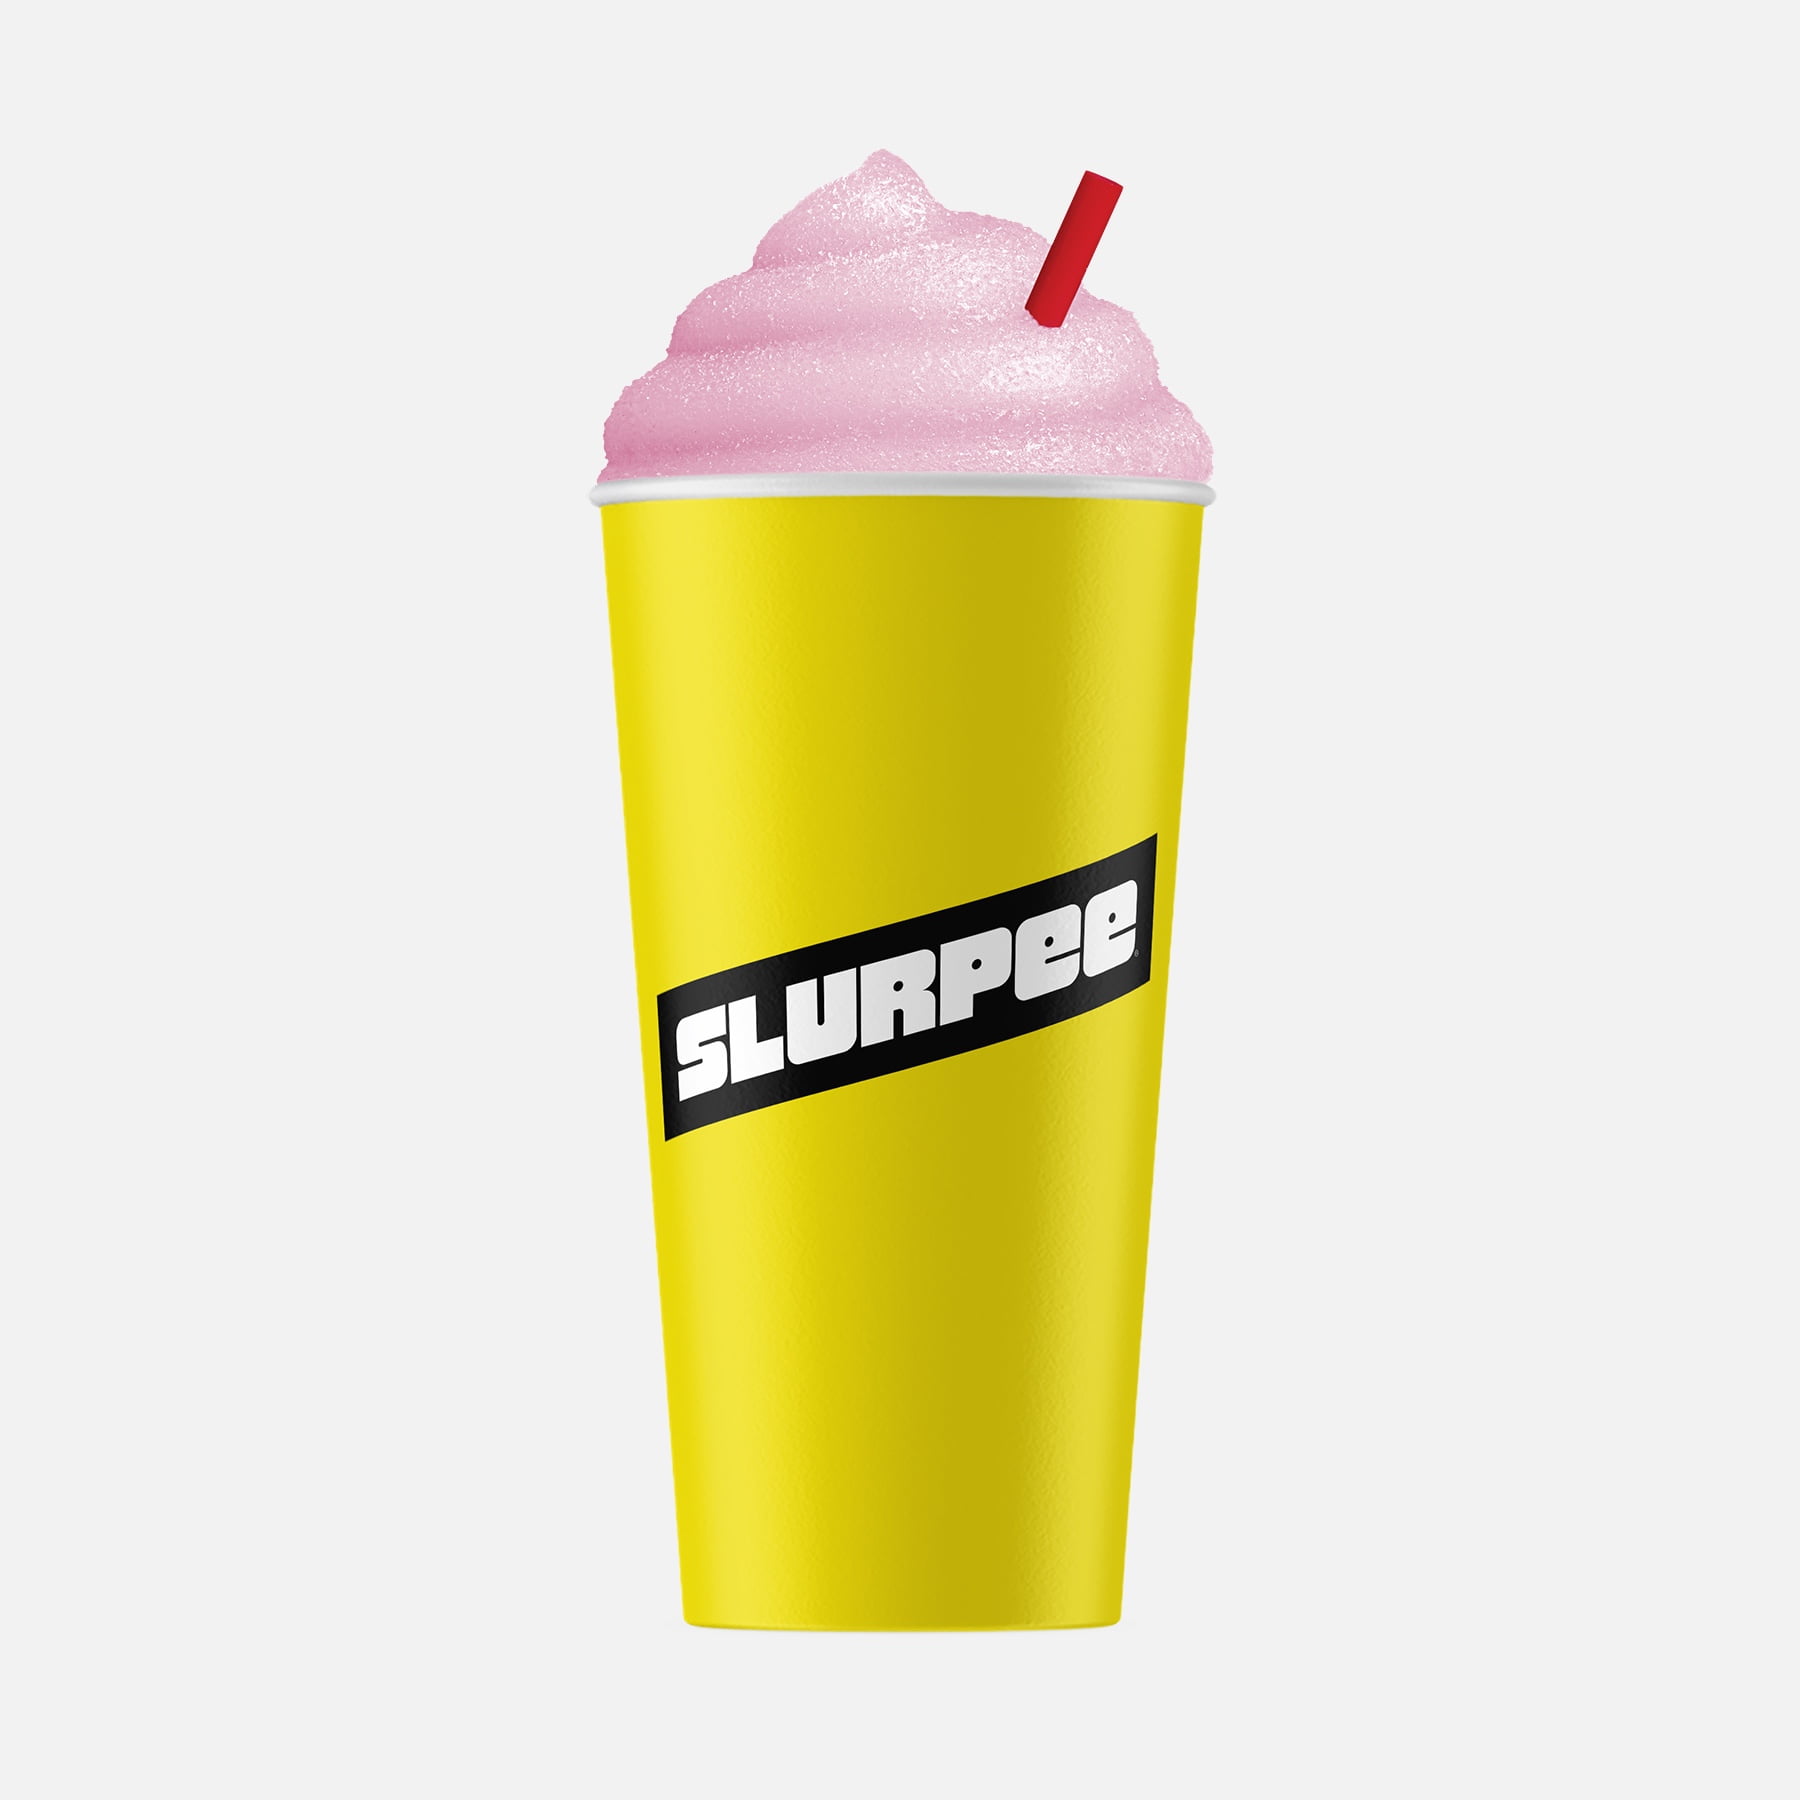 Blueberry Lemonade Bliss Available Now Near You 24/7 | 7-Eleven